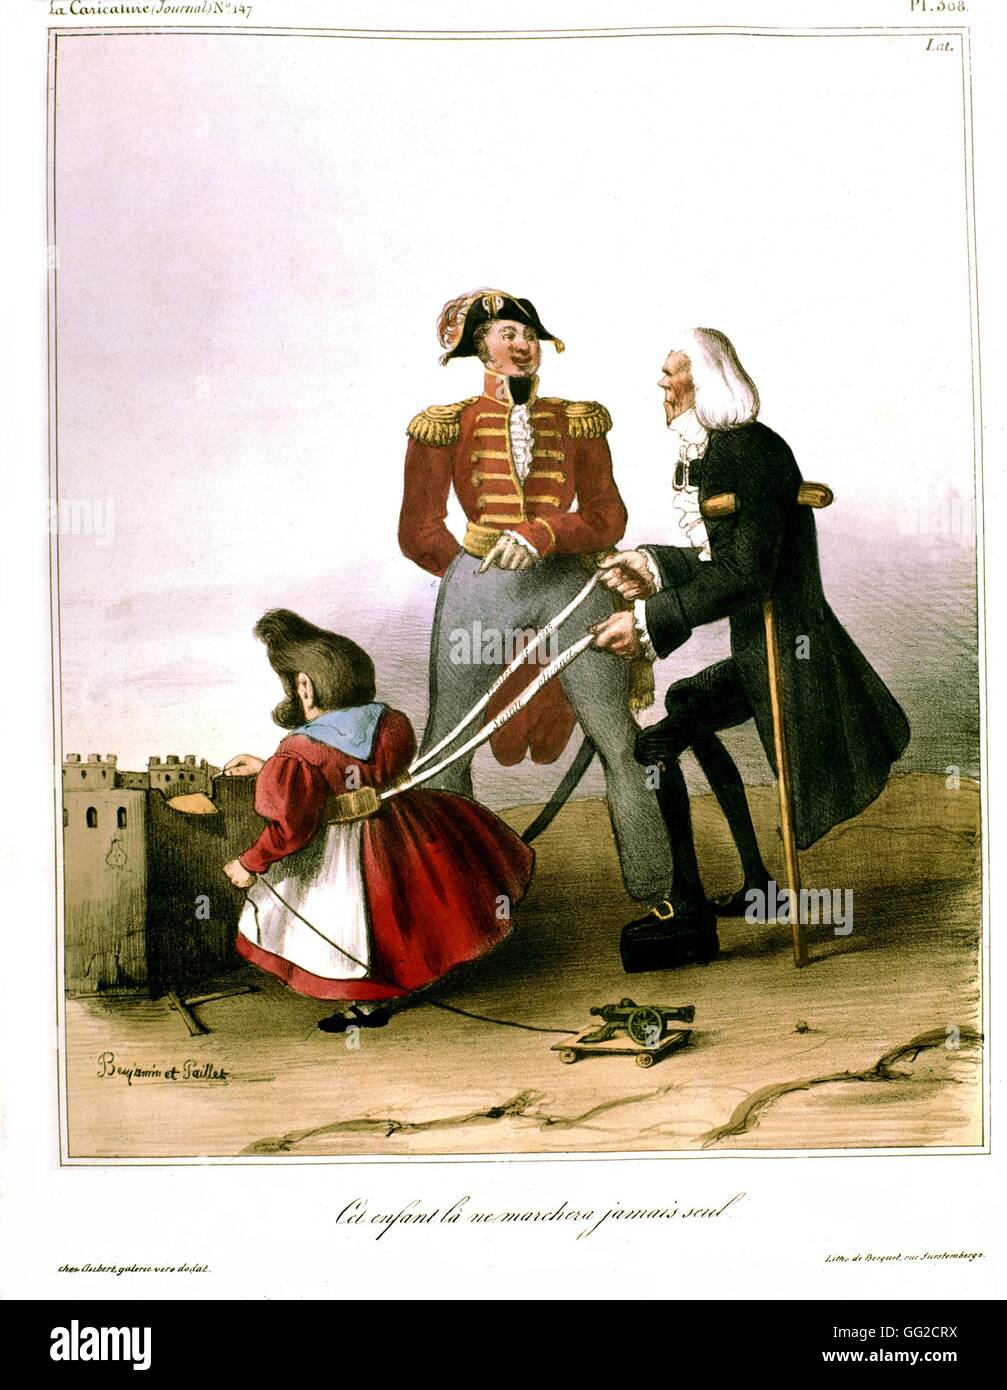 Lithograph by Roubaudi 'This child will never walk by himself'. Talleyrand holding Louis-Philippe I with the 1815 treaties 19th century France Stock Photo